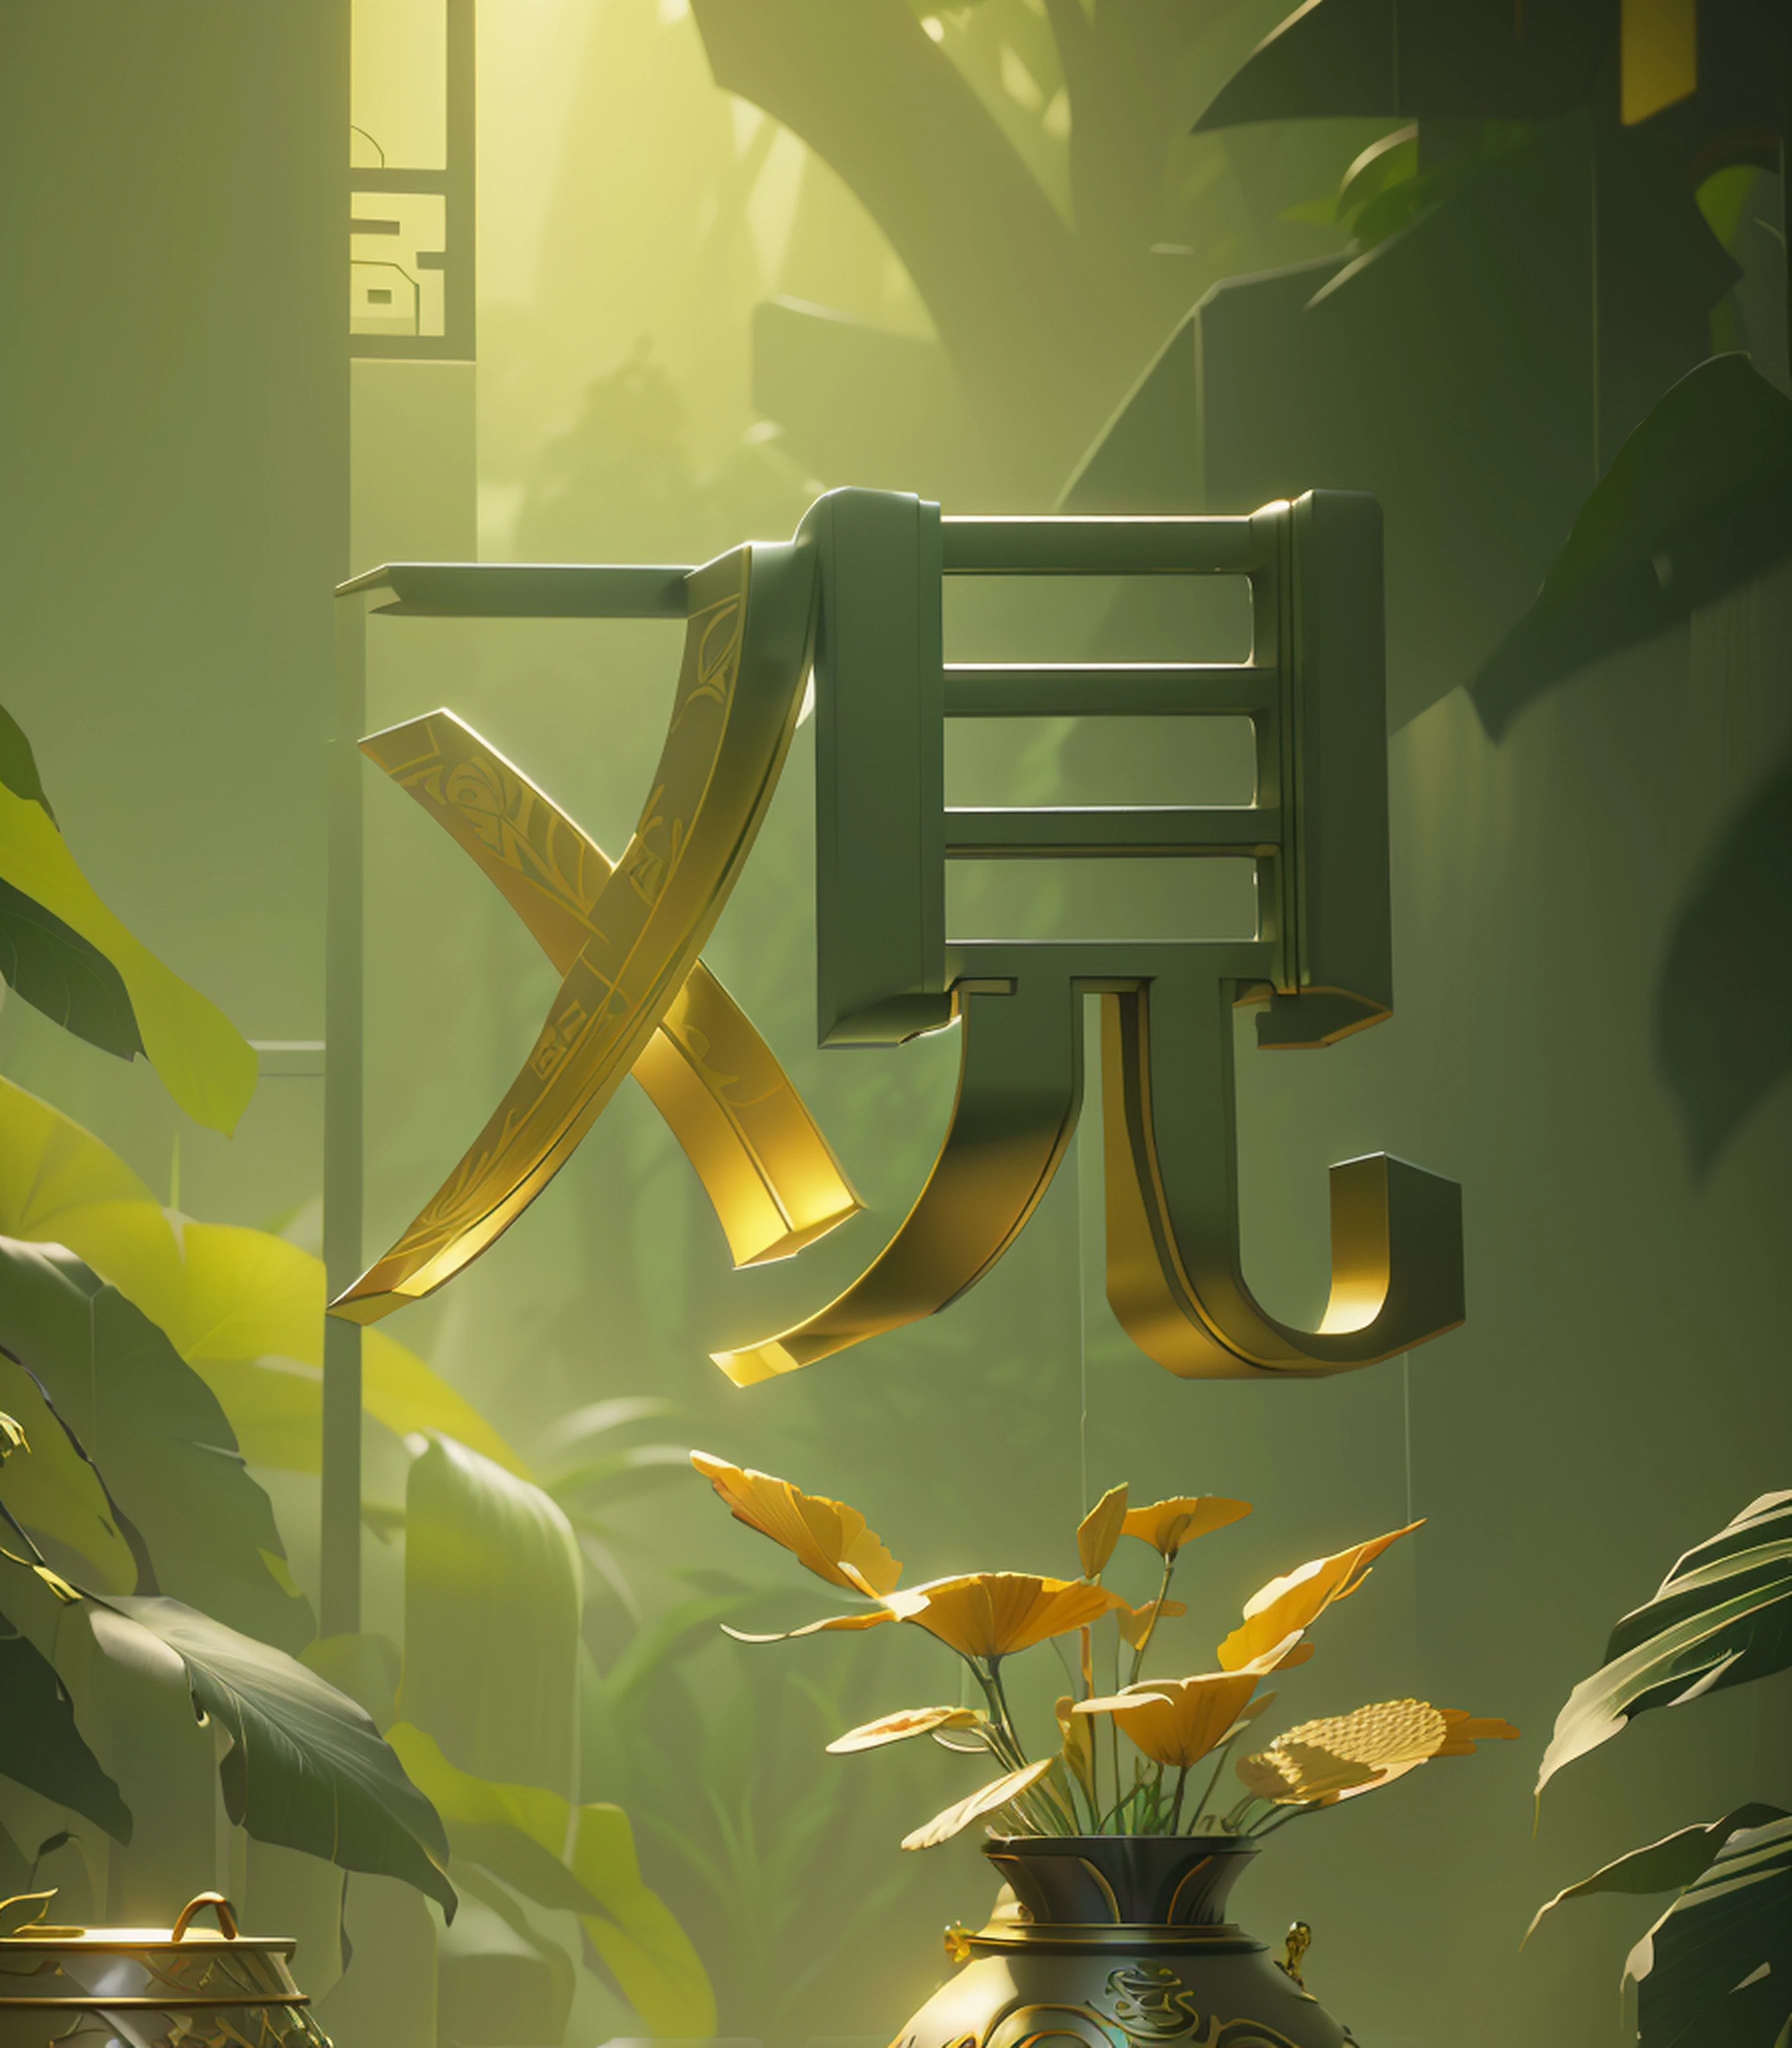 Do not vase，3 d render stylized, trend on behance 3 d art, trend on behance 3d art, stylized 3d render, Stylized 3 D, G Liulian art style, art nouveau jungle environment, rendered in cinema 4 d, Rendered in Cinema4D, daily render，Super lots of detail，Wrapped in metal，Tyndall light effect，Hyper-realistic，Realiy，filmposter，18k,Virtual engine rendering，Blender rendering，adobe photoshop:2,depth of fields